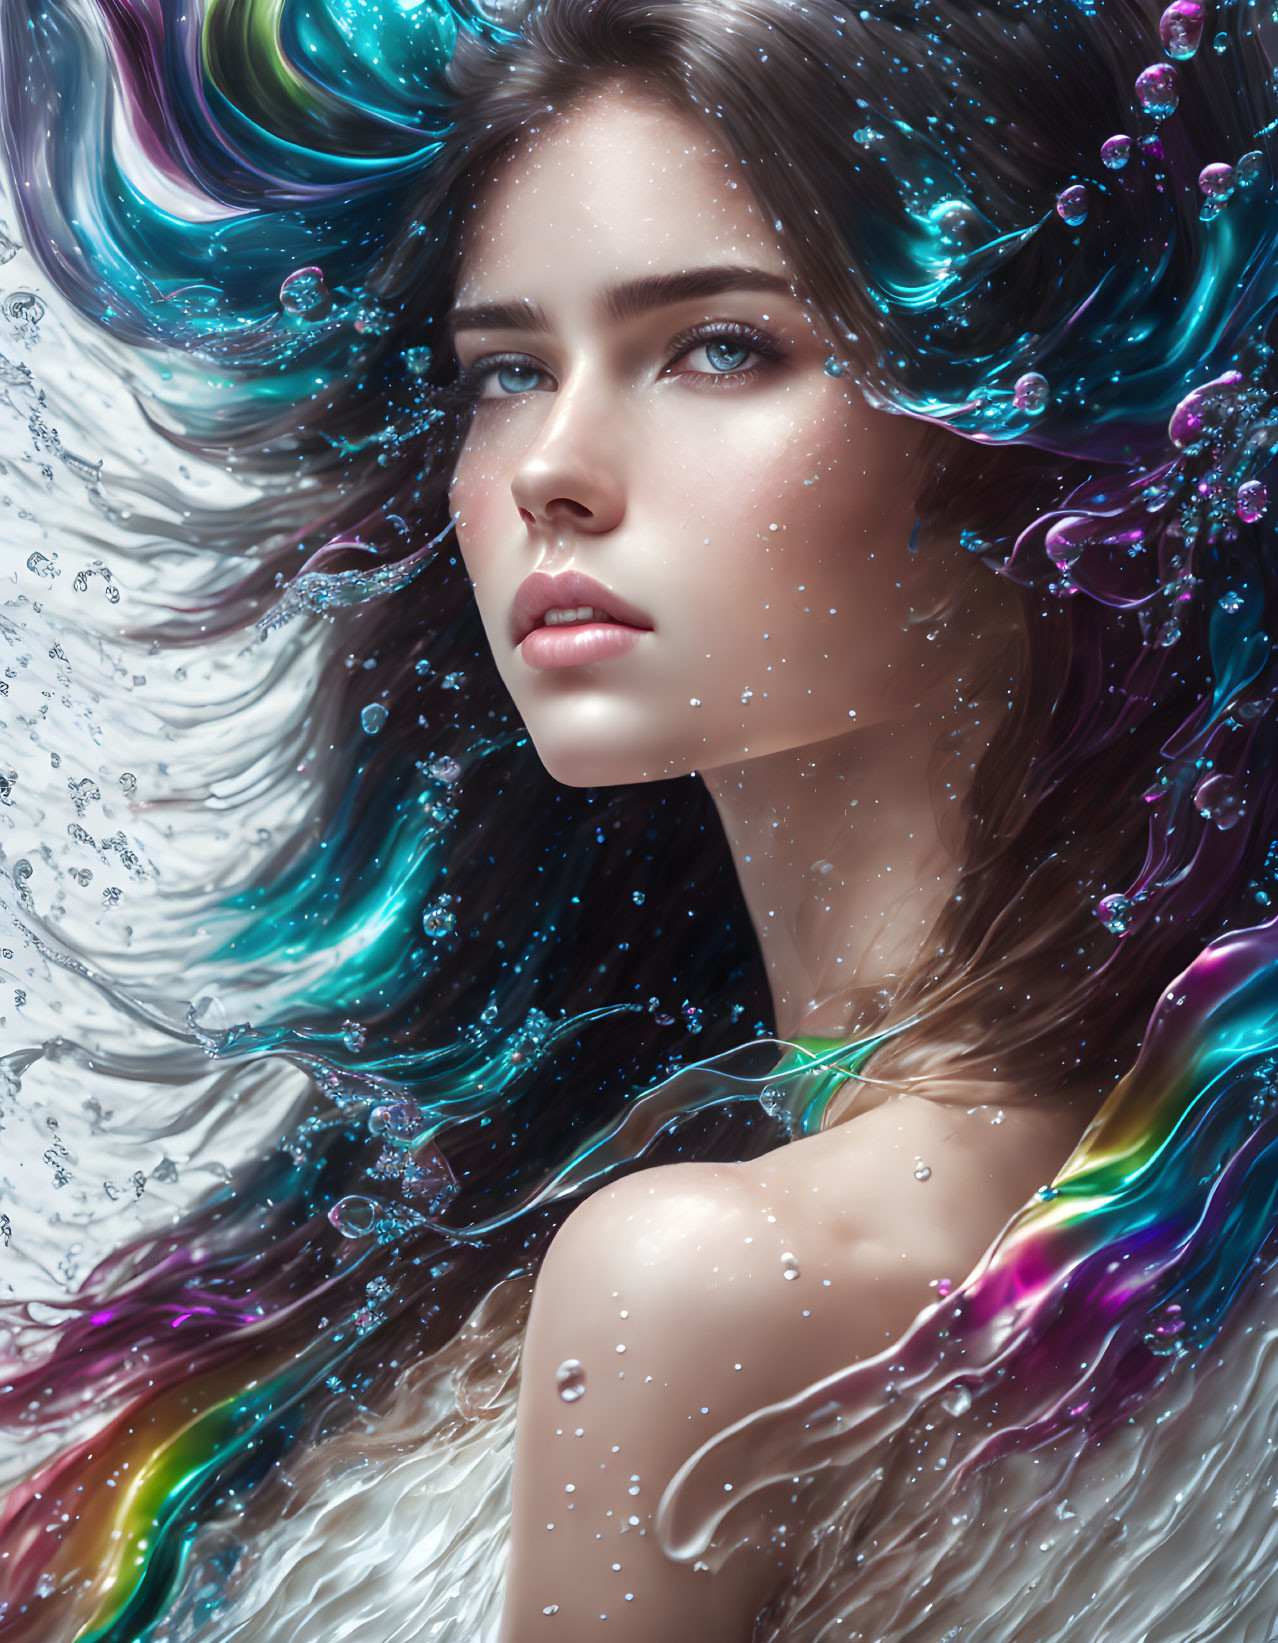 A girl surrounded by colorful water effects